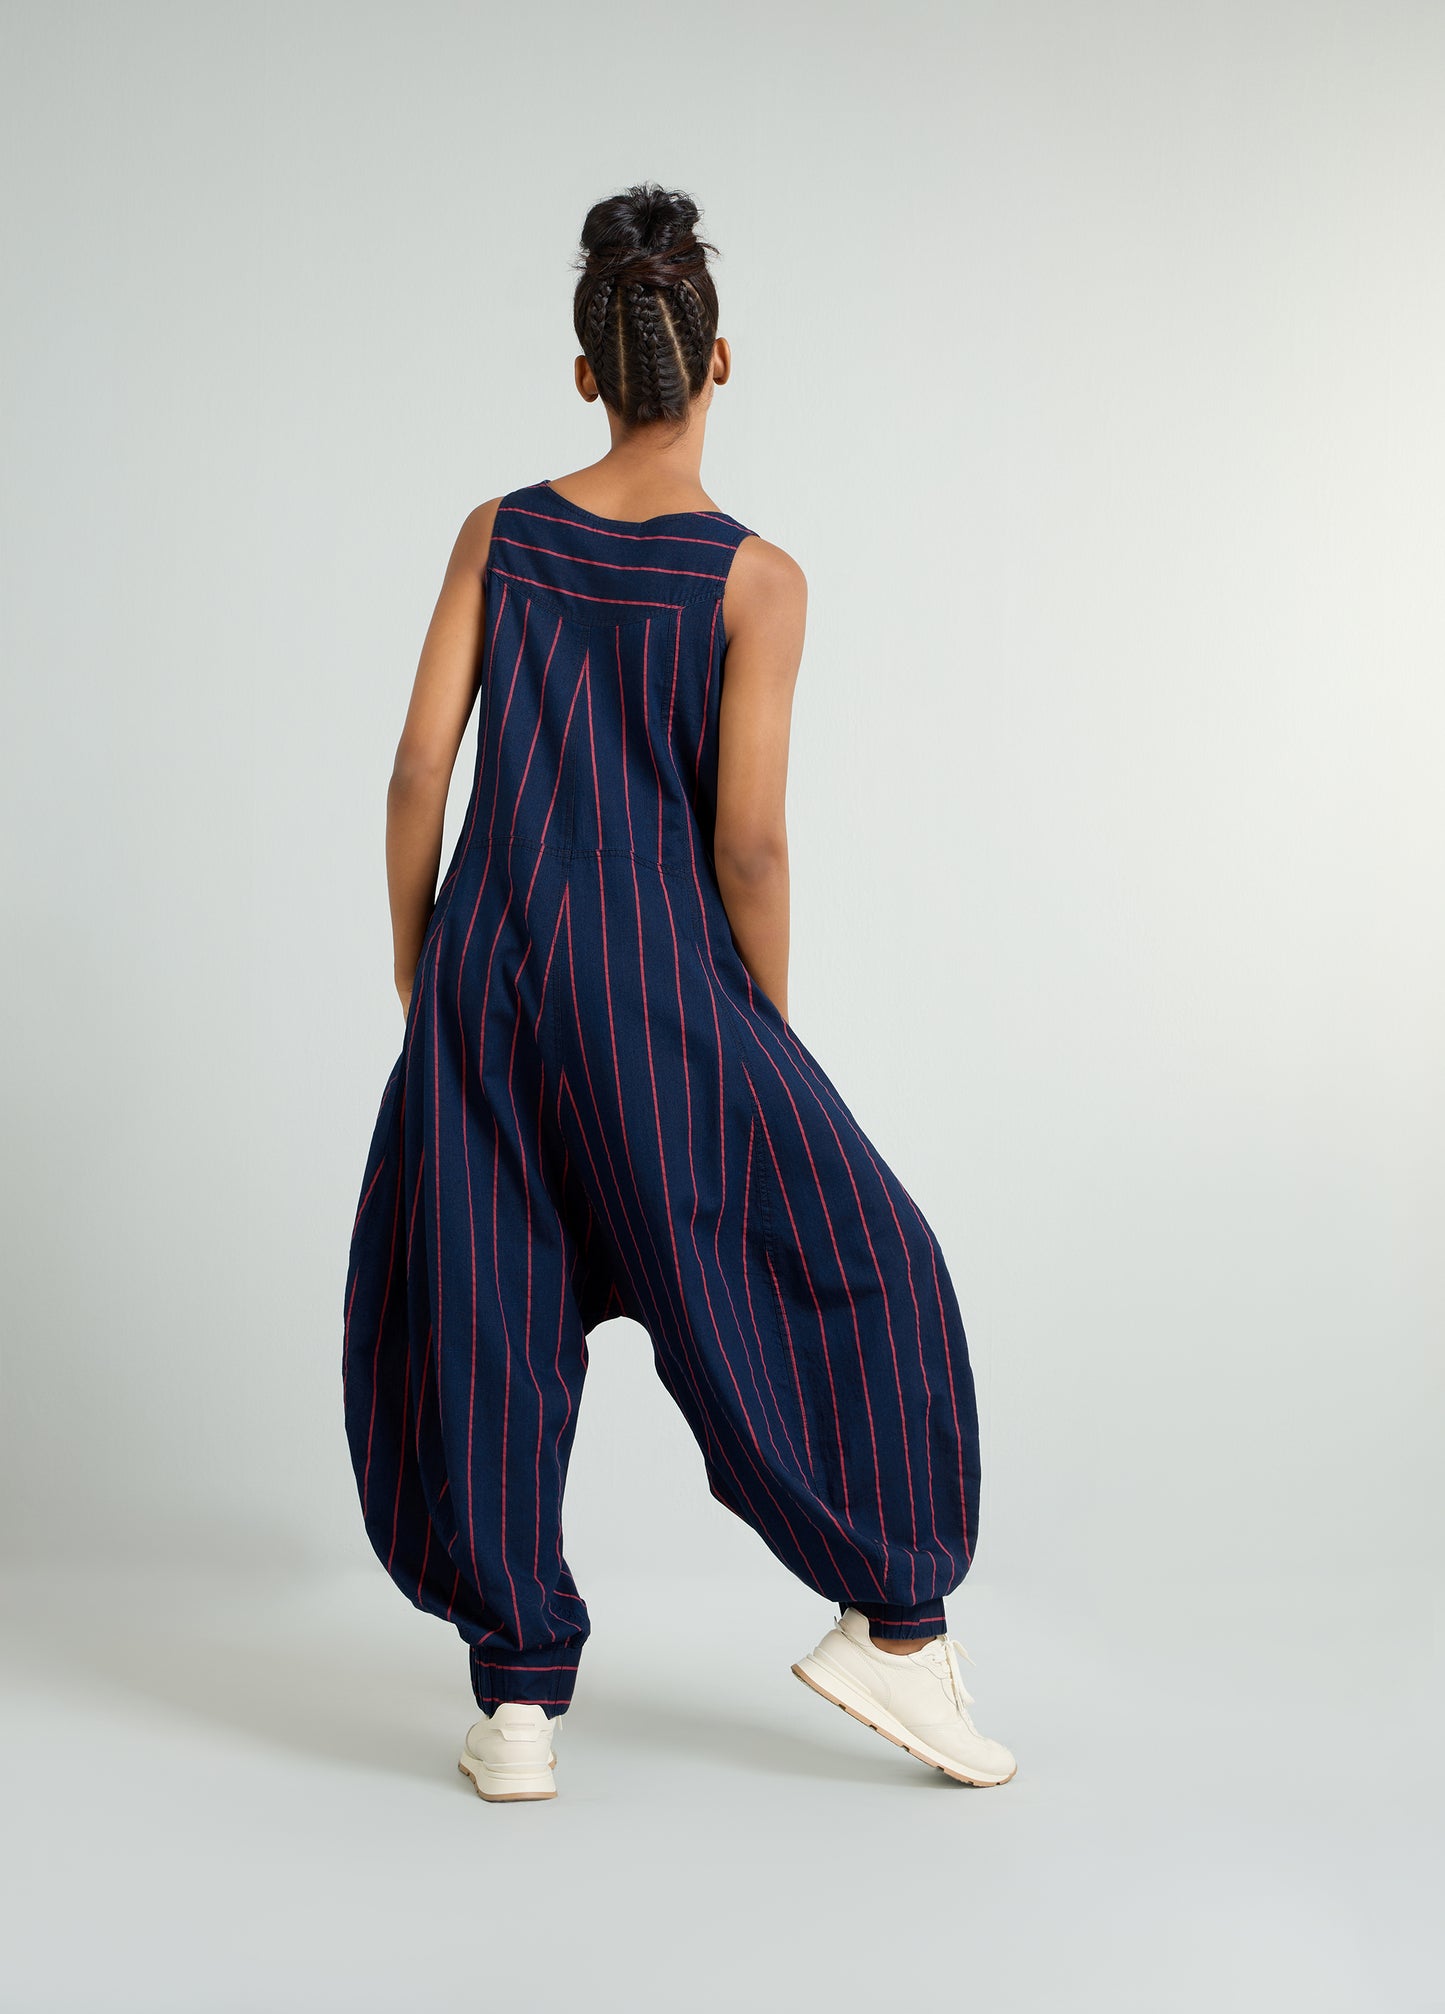 LOW CROTCH JUMPSUIT WITH FRONT ZIP